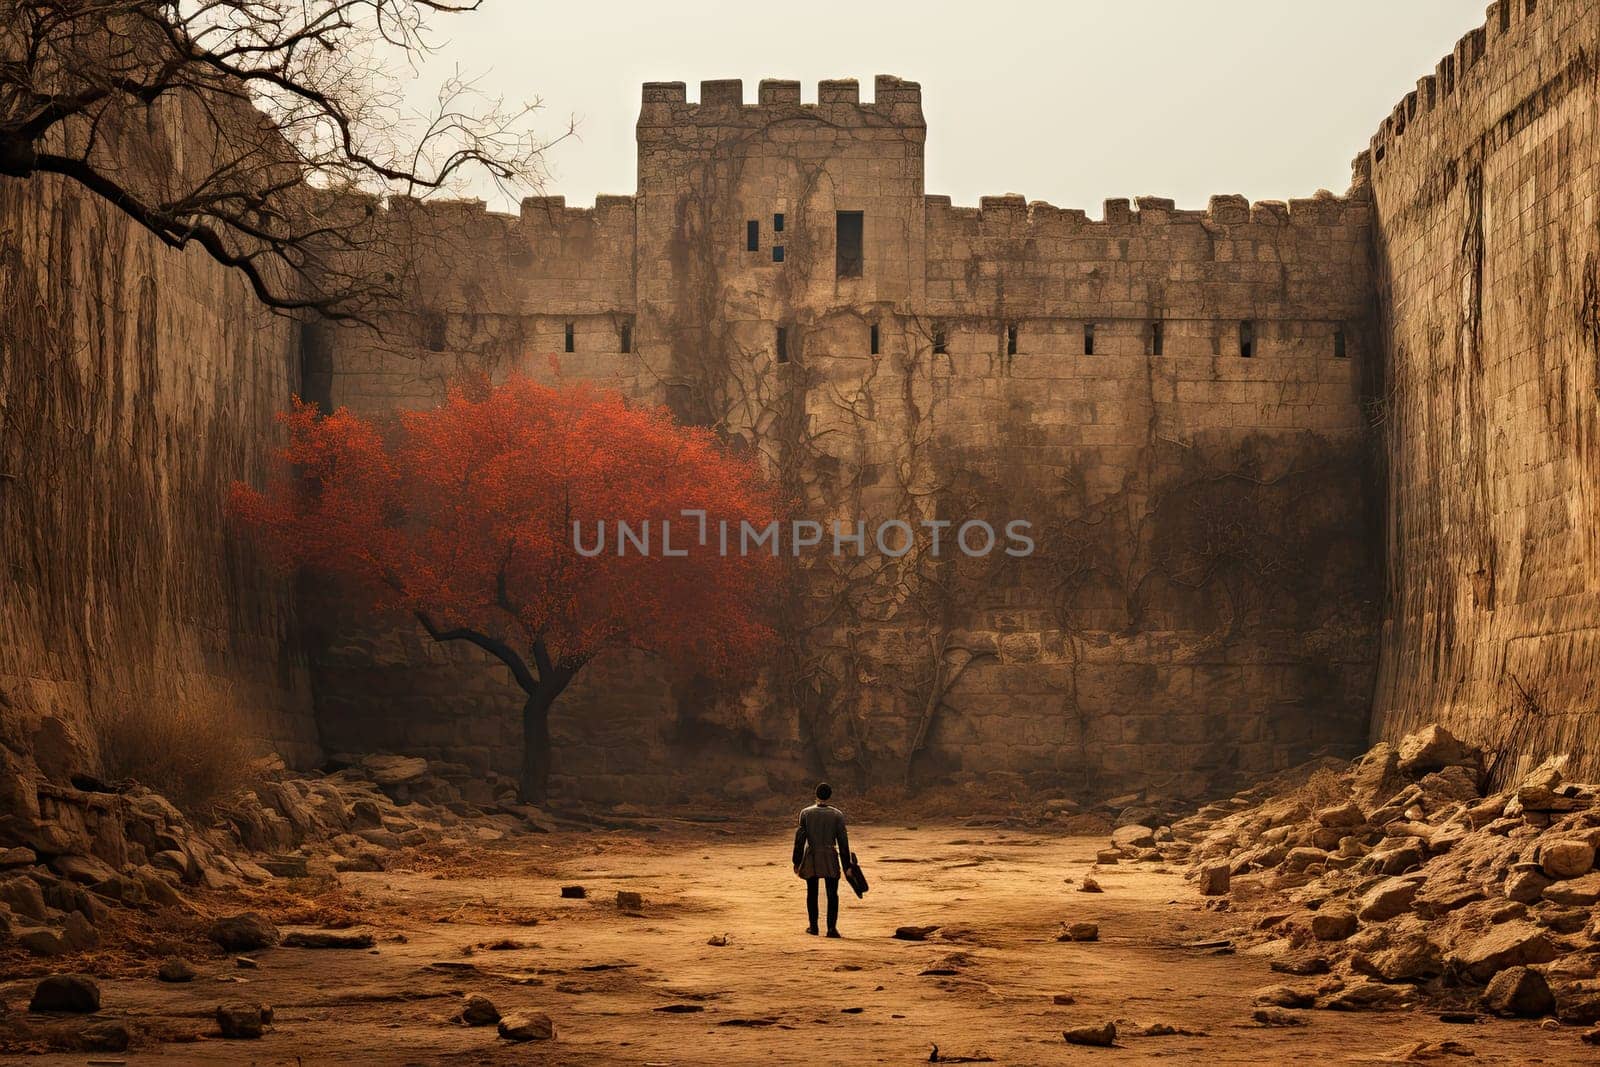 A Lone Wanderer Embarks on a Serene Journey Amidst a Majestic Castle and Rustic Path